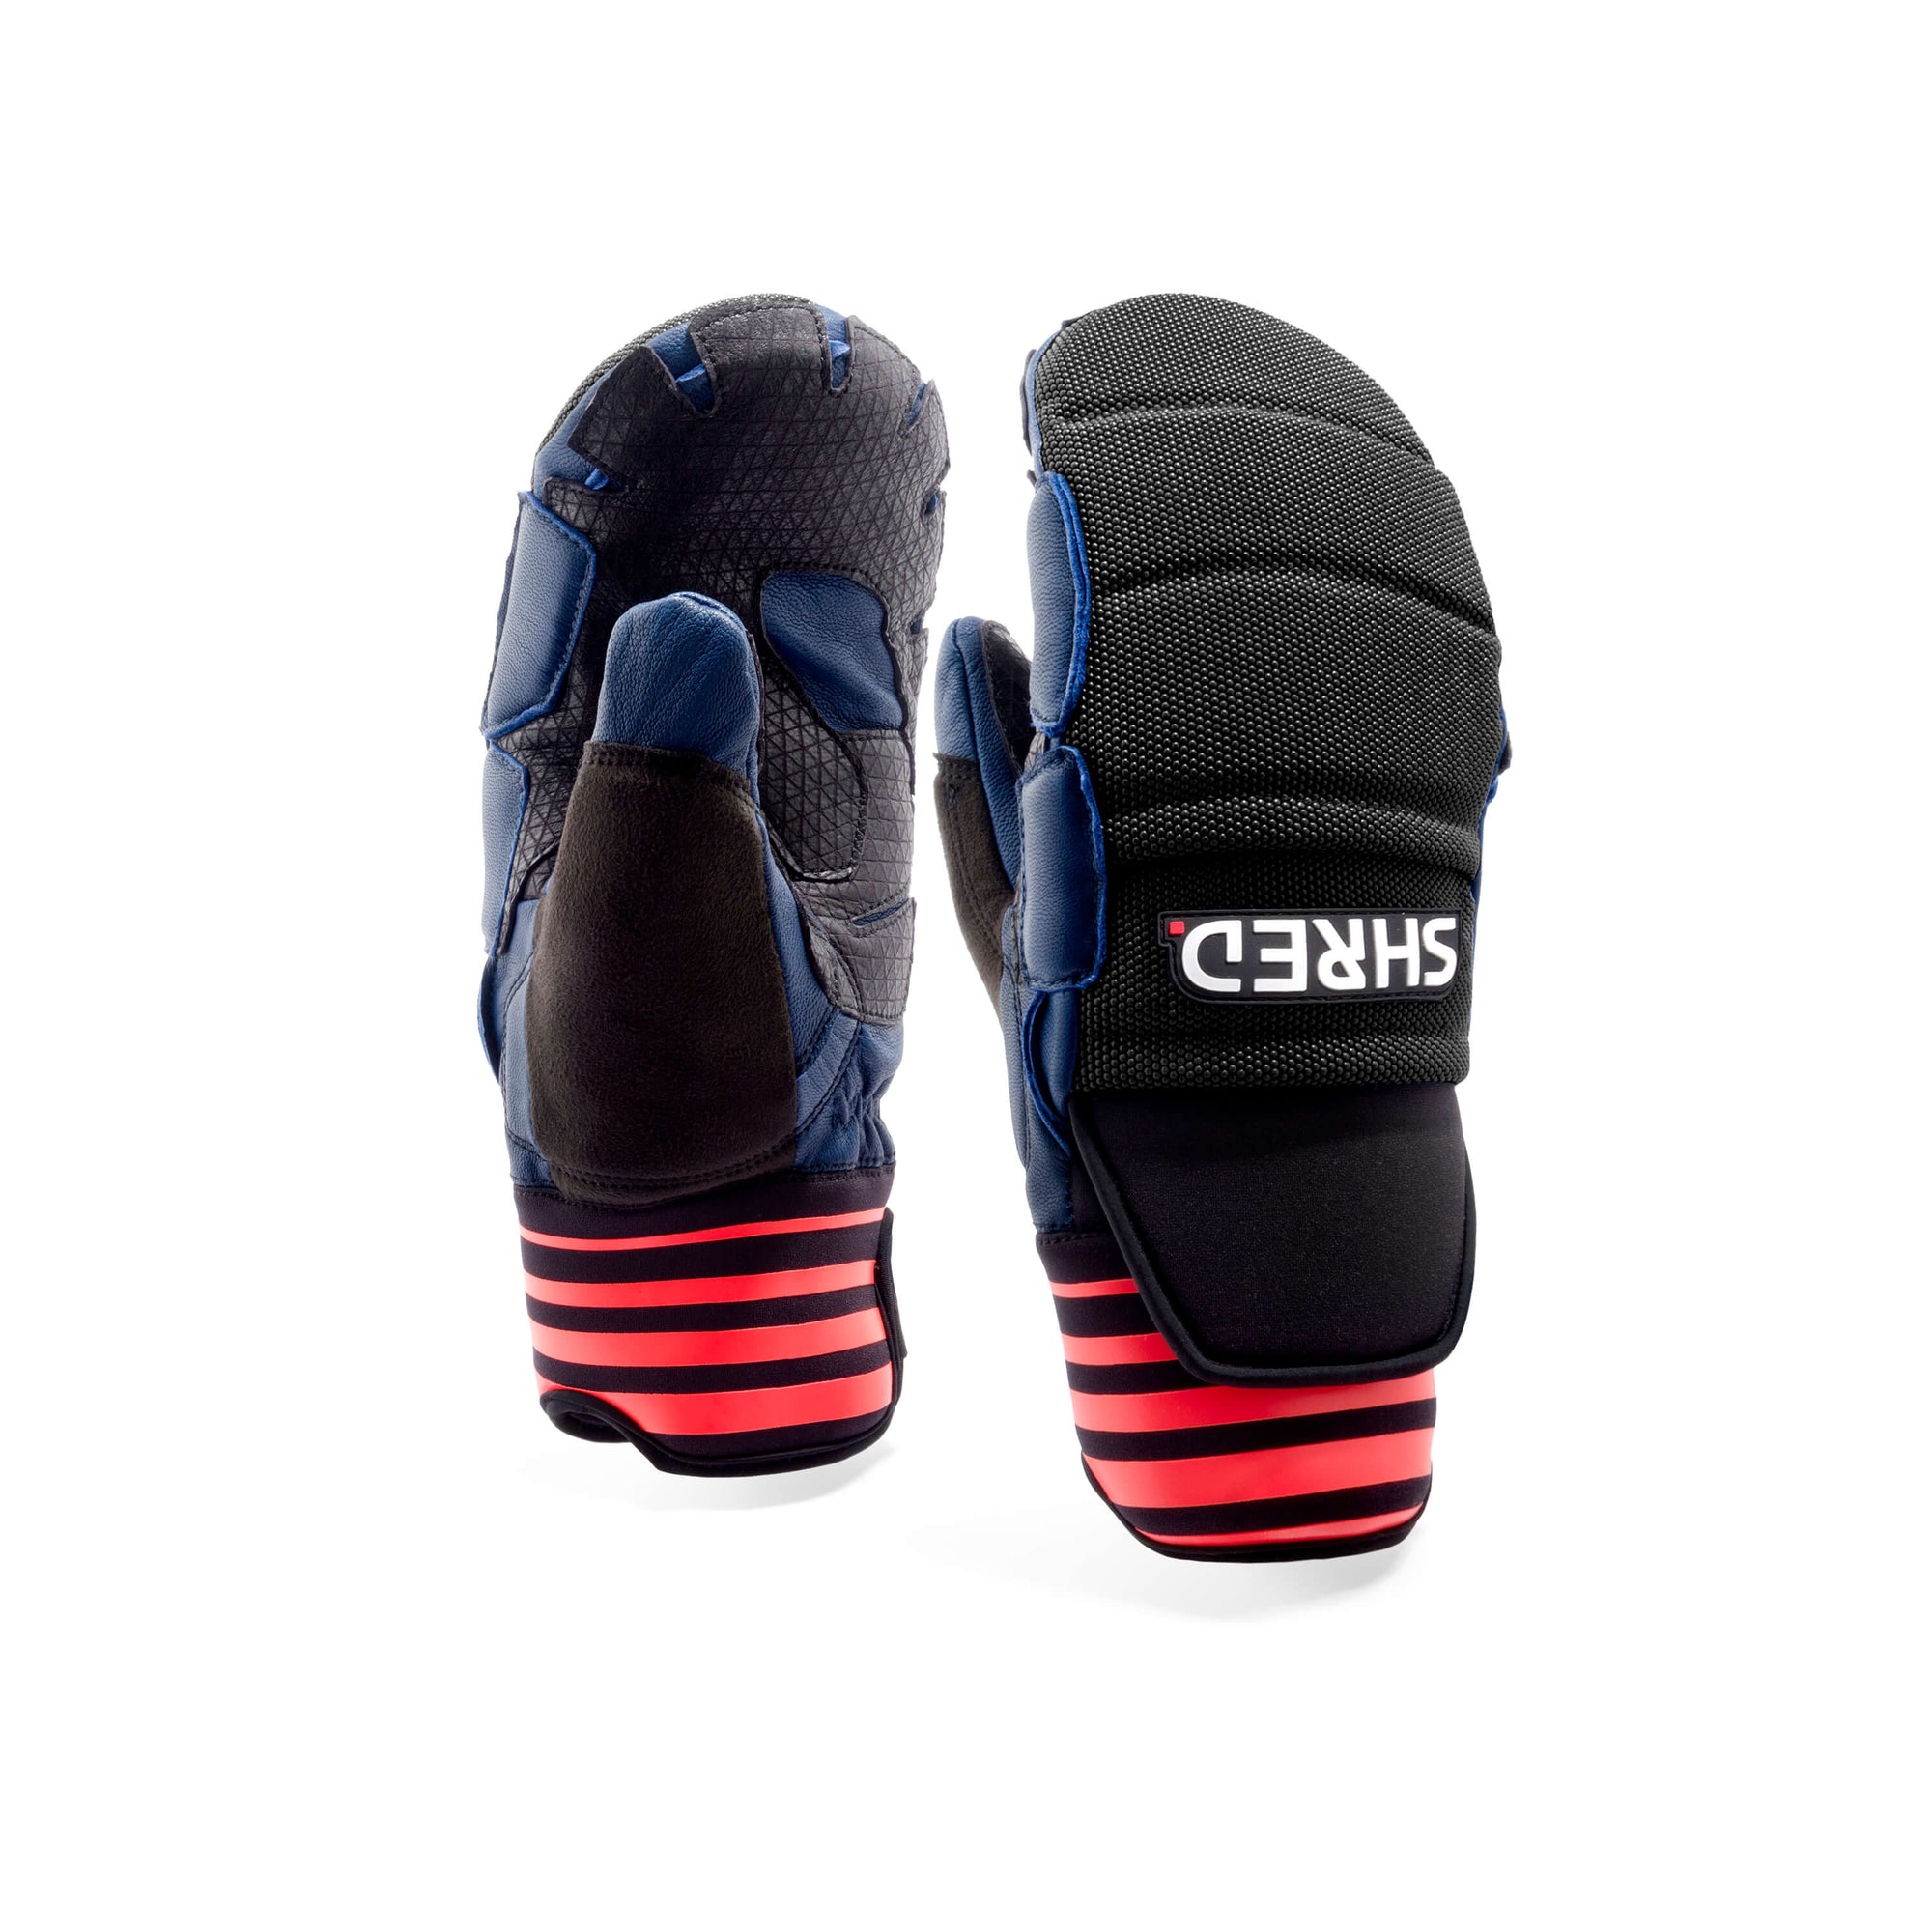 Ski Race Protective Mittens - Protective Gloves|BPRDMJ11L,BPRDMJ11M,BPRDMJ11S,BPRDMJ11XL,BPRDMJ11XS